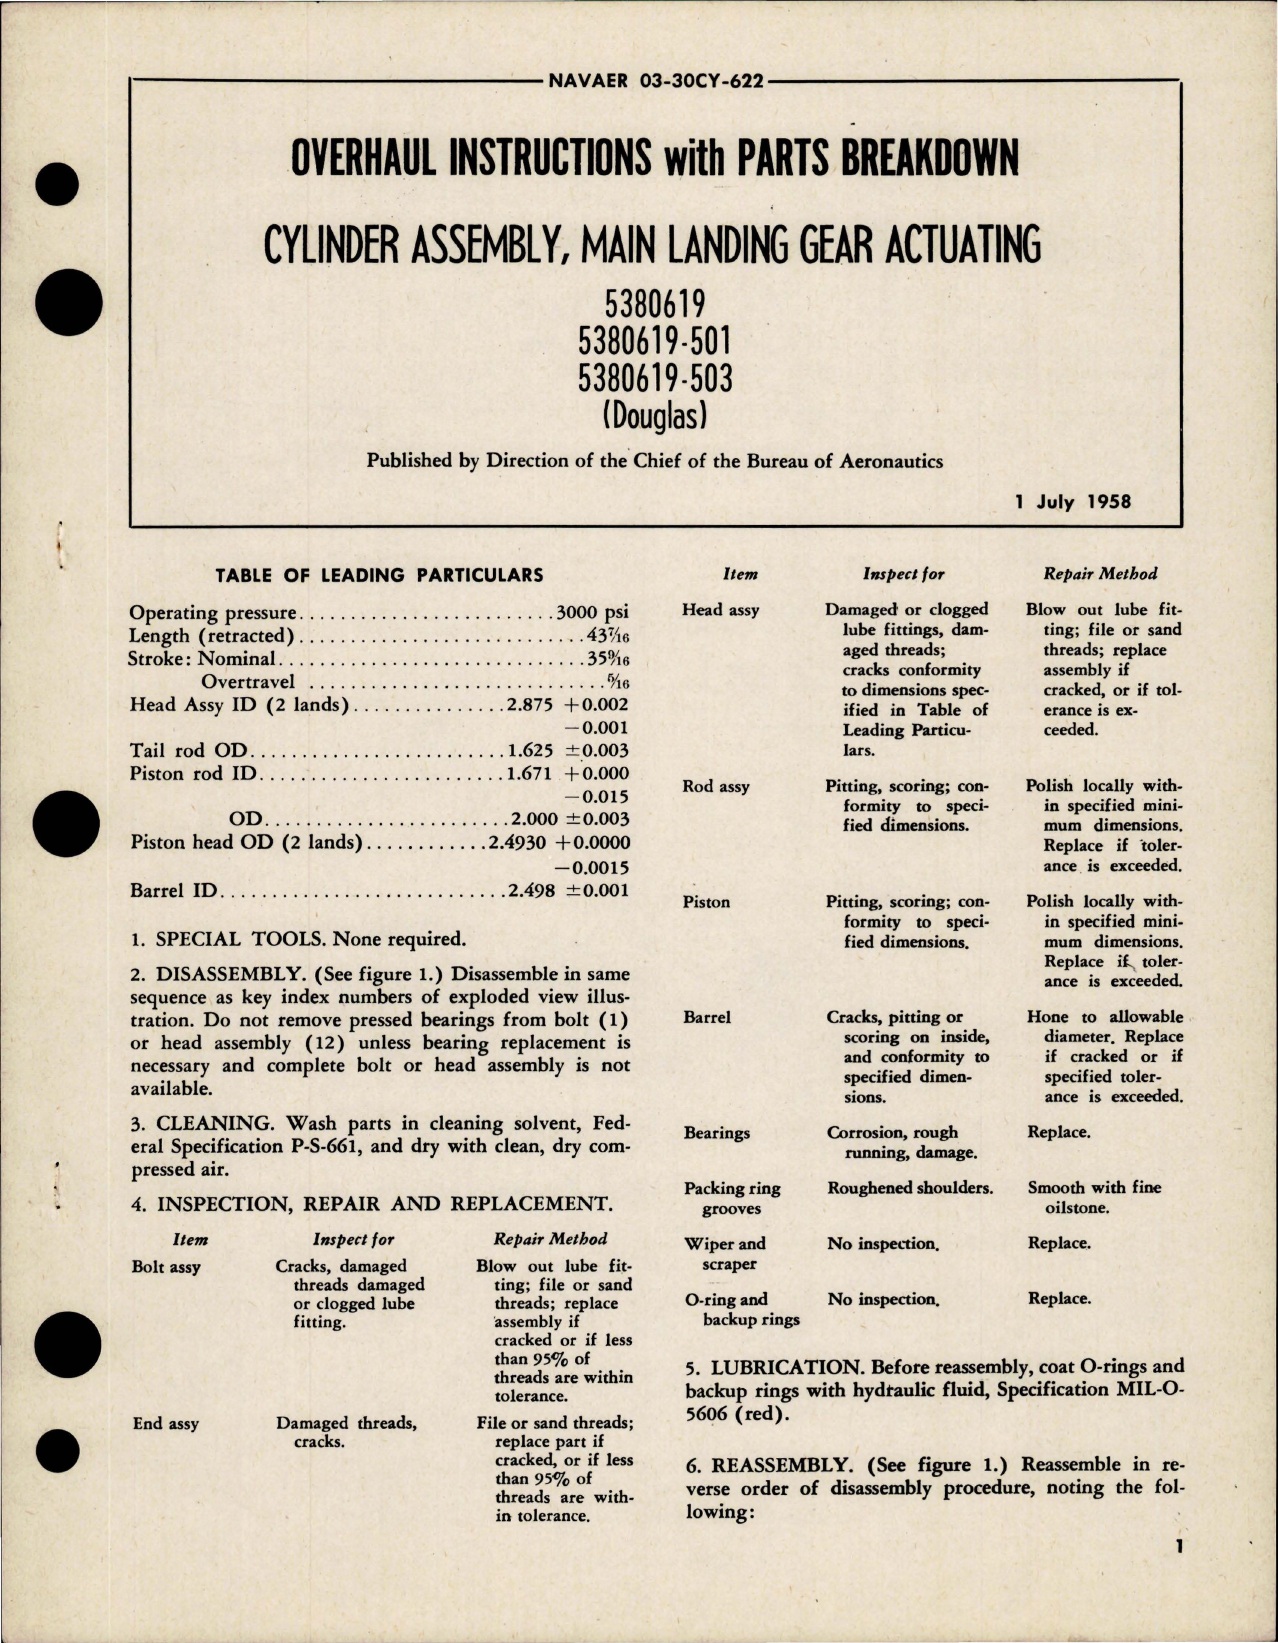 Sample page 1 from AirCorps Library document: Overhaul Instructions with Parts for Main Landing Gear Actuating Cylinder Assembly 